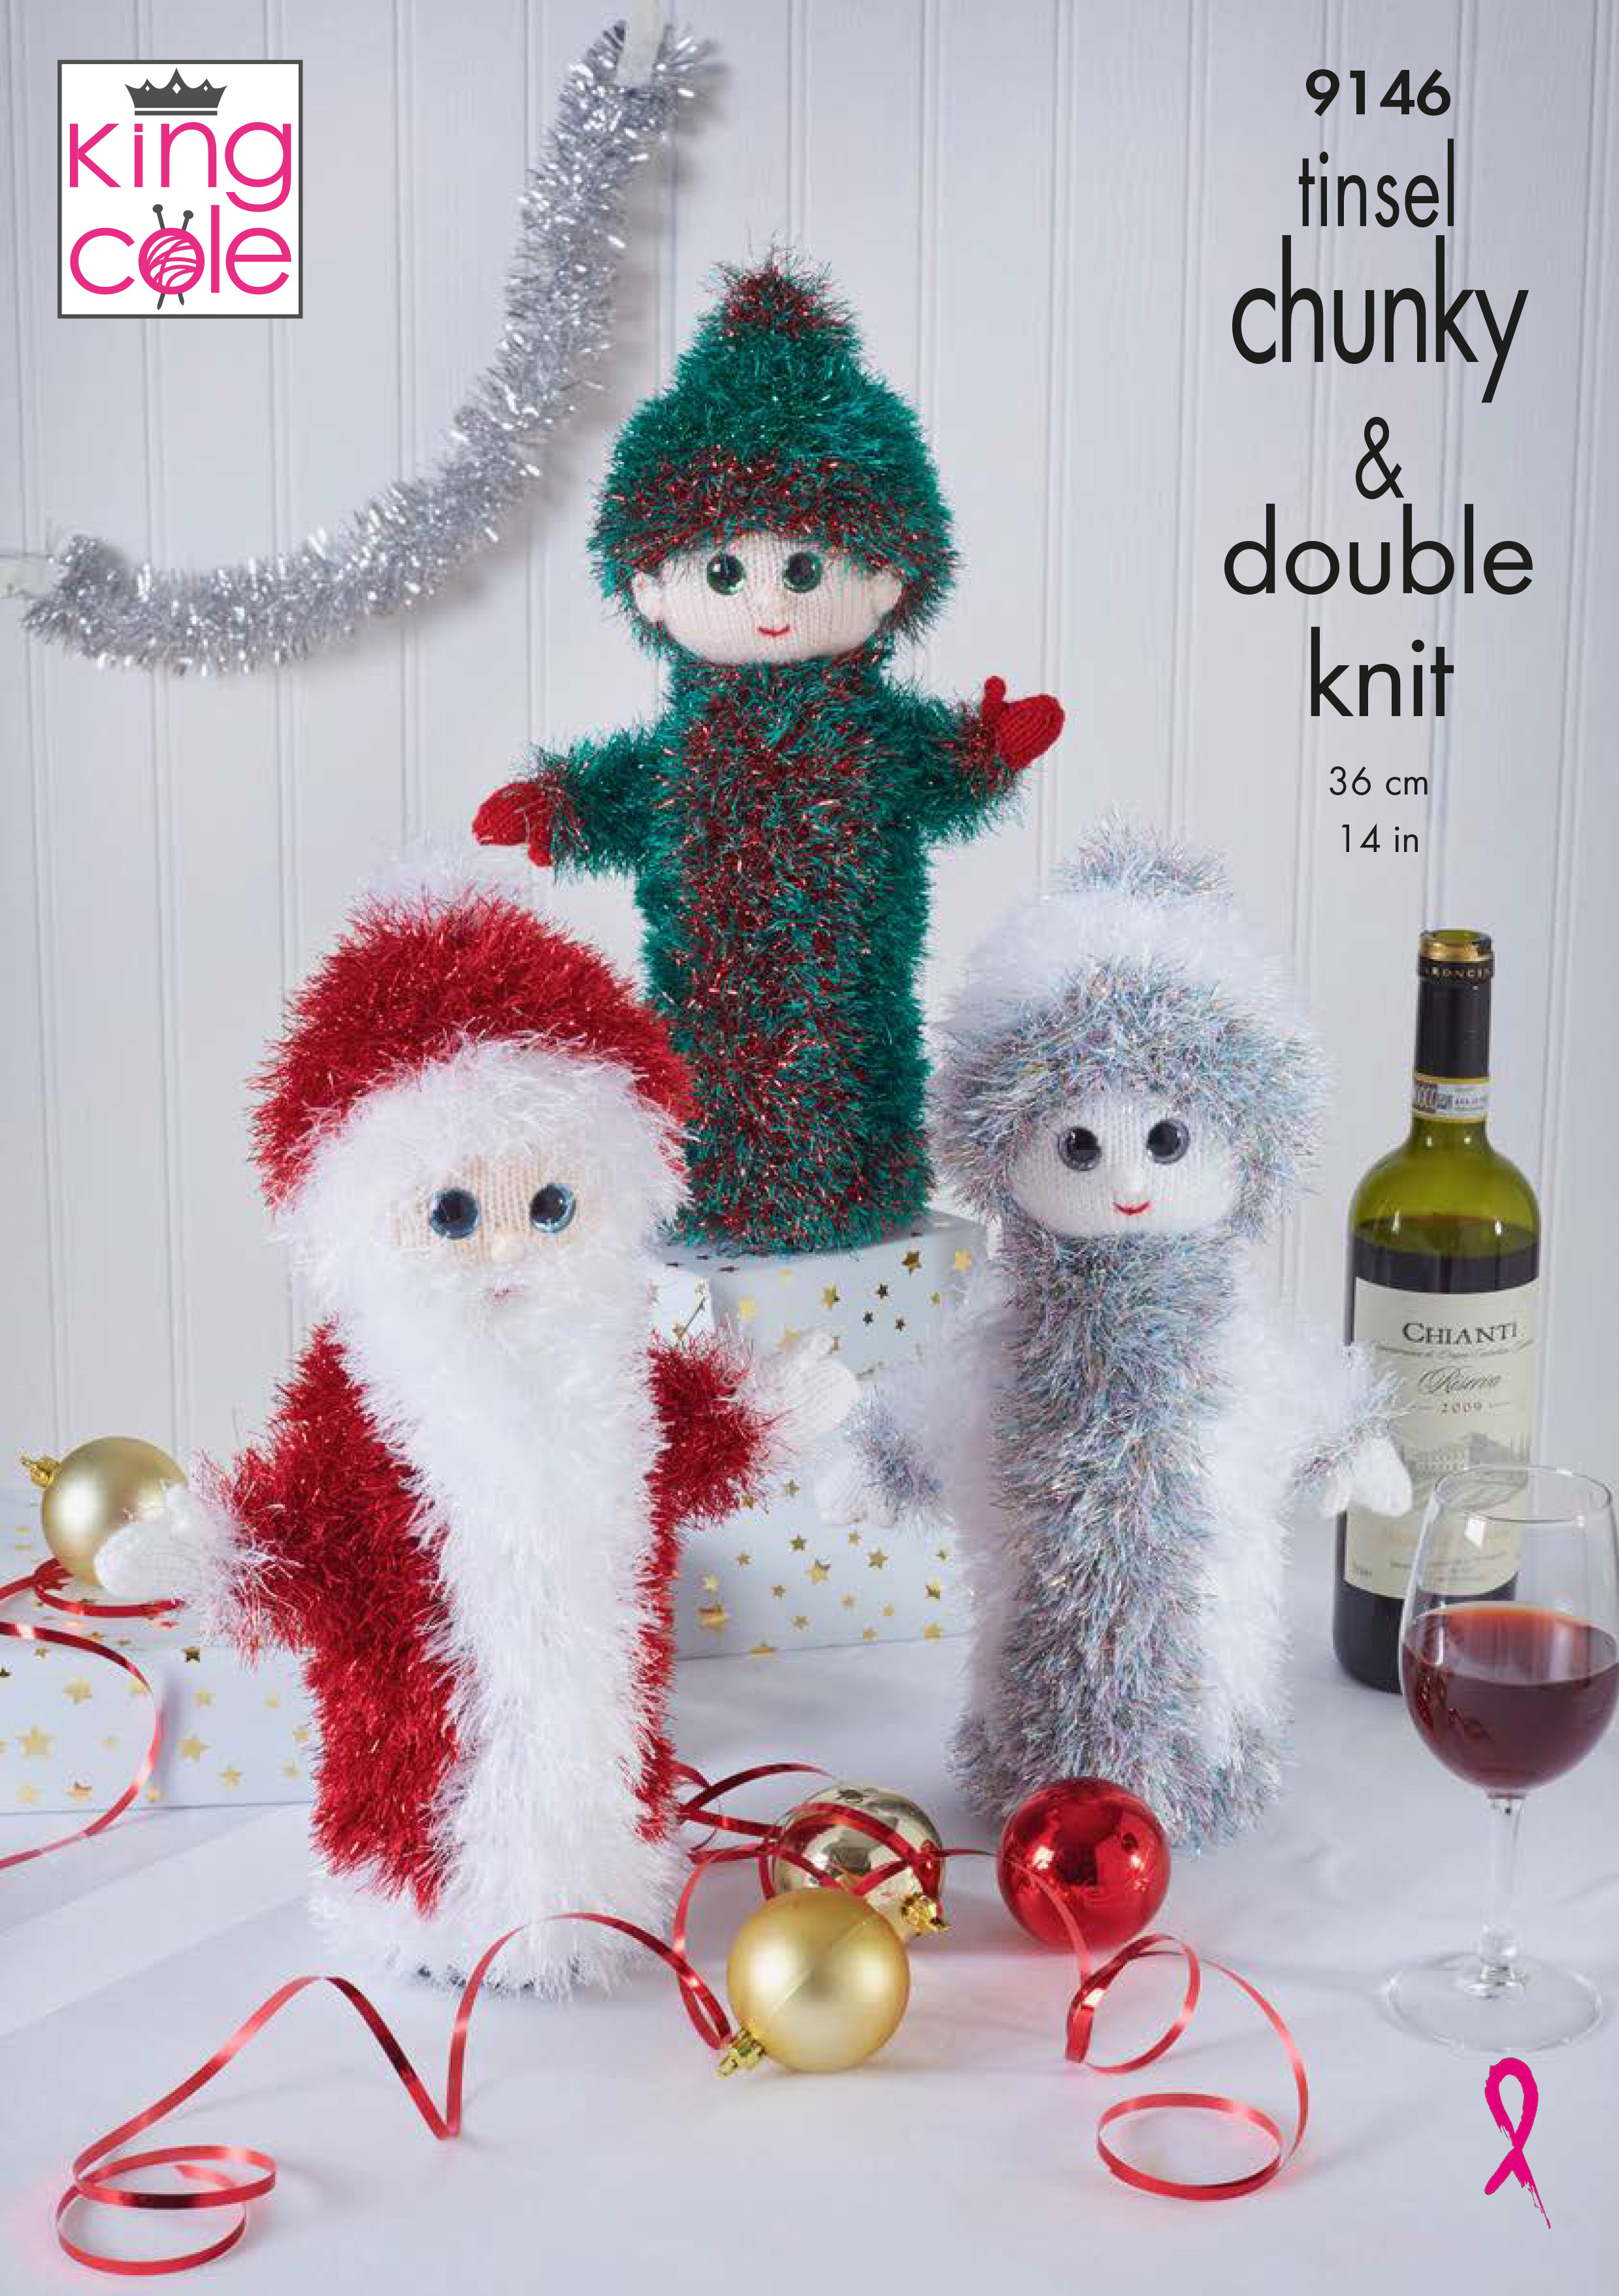 Christmas Wine Bottle Covers Knitted in Tinsel Chunky x3